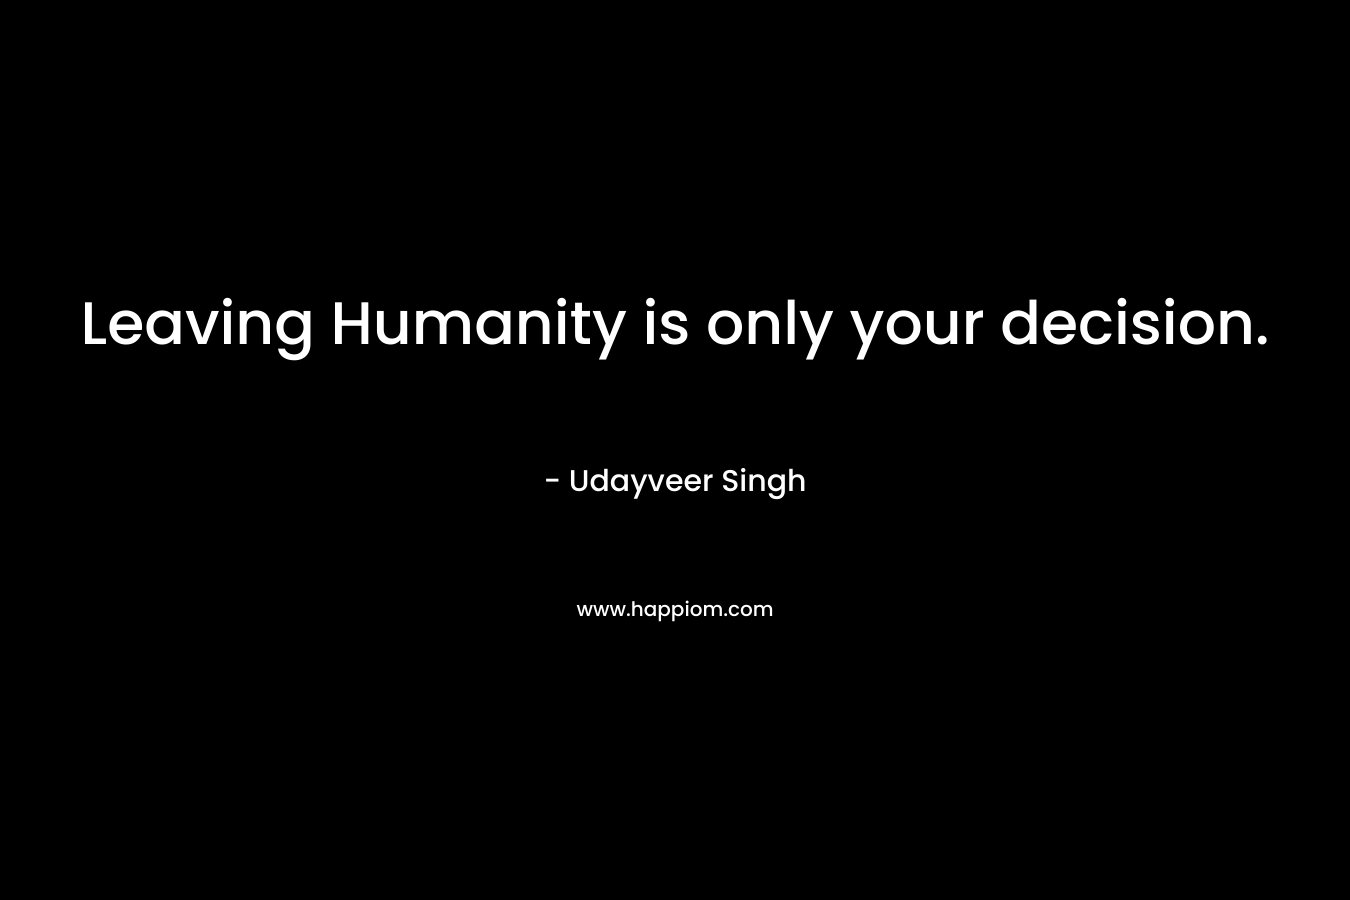 Leaving Humanity is only your decision. – Udayveer Singh